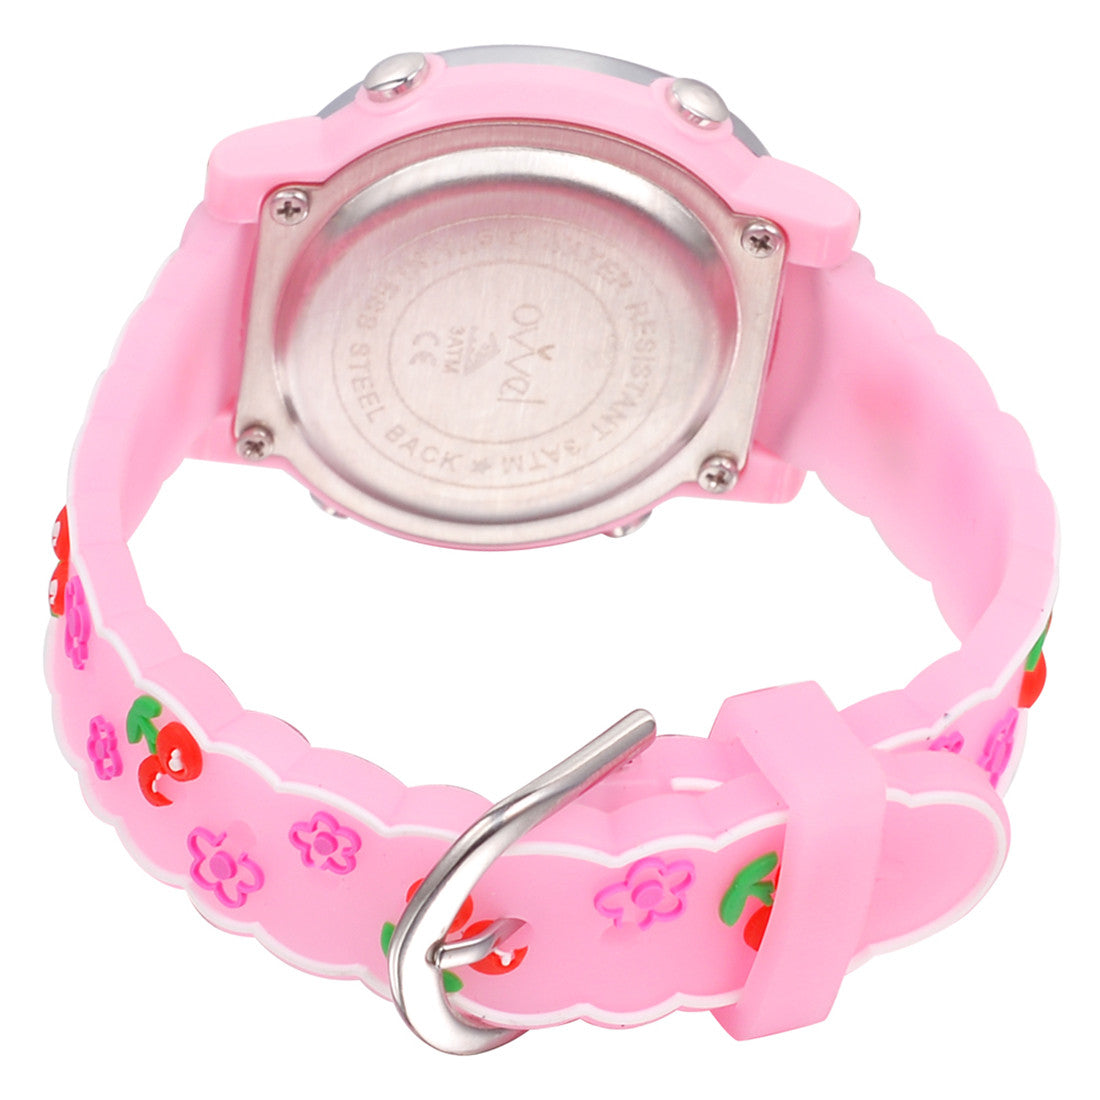 Girls Digital Sports Watch with many features - Cherries